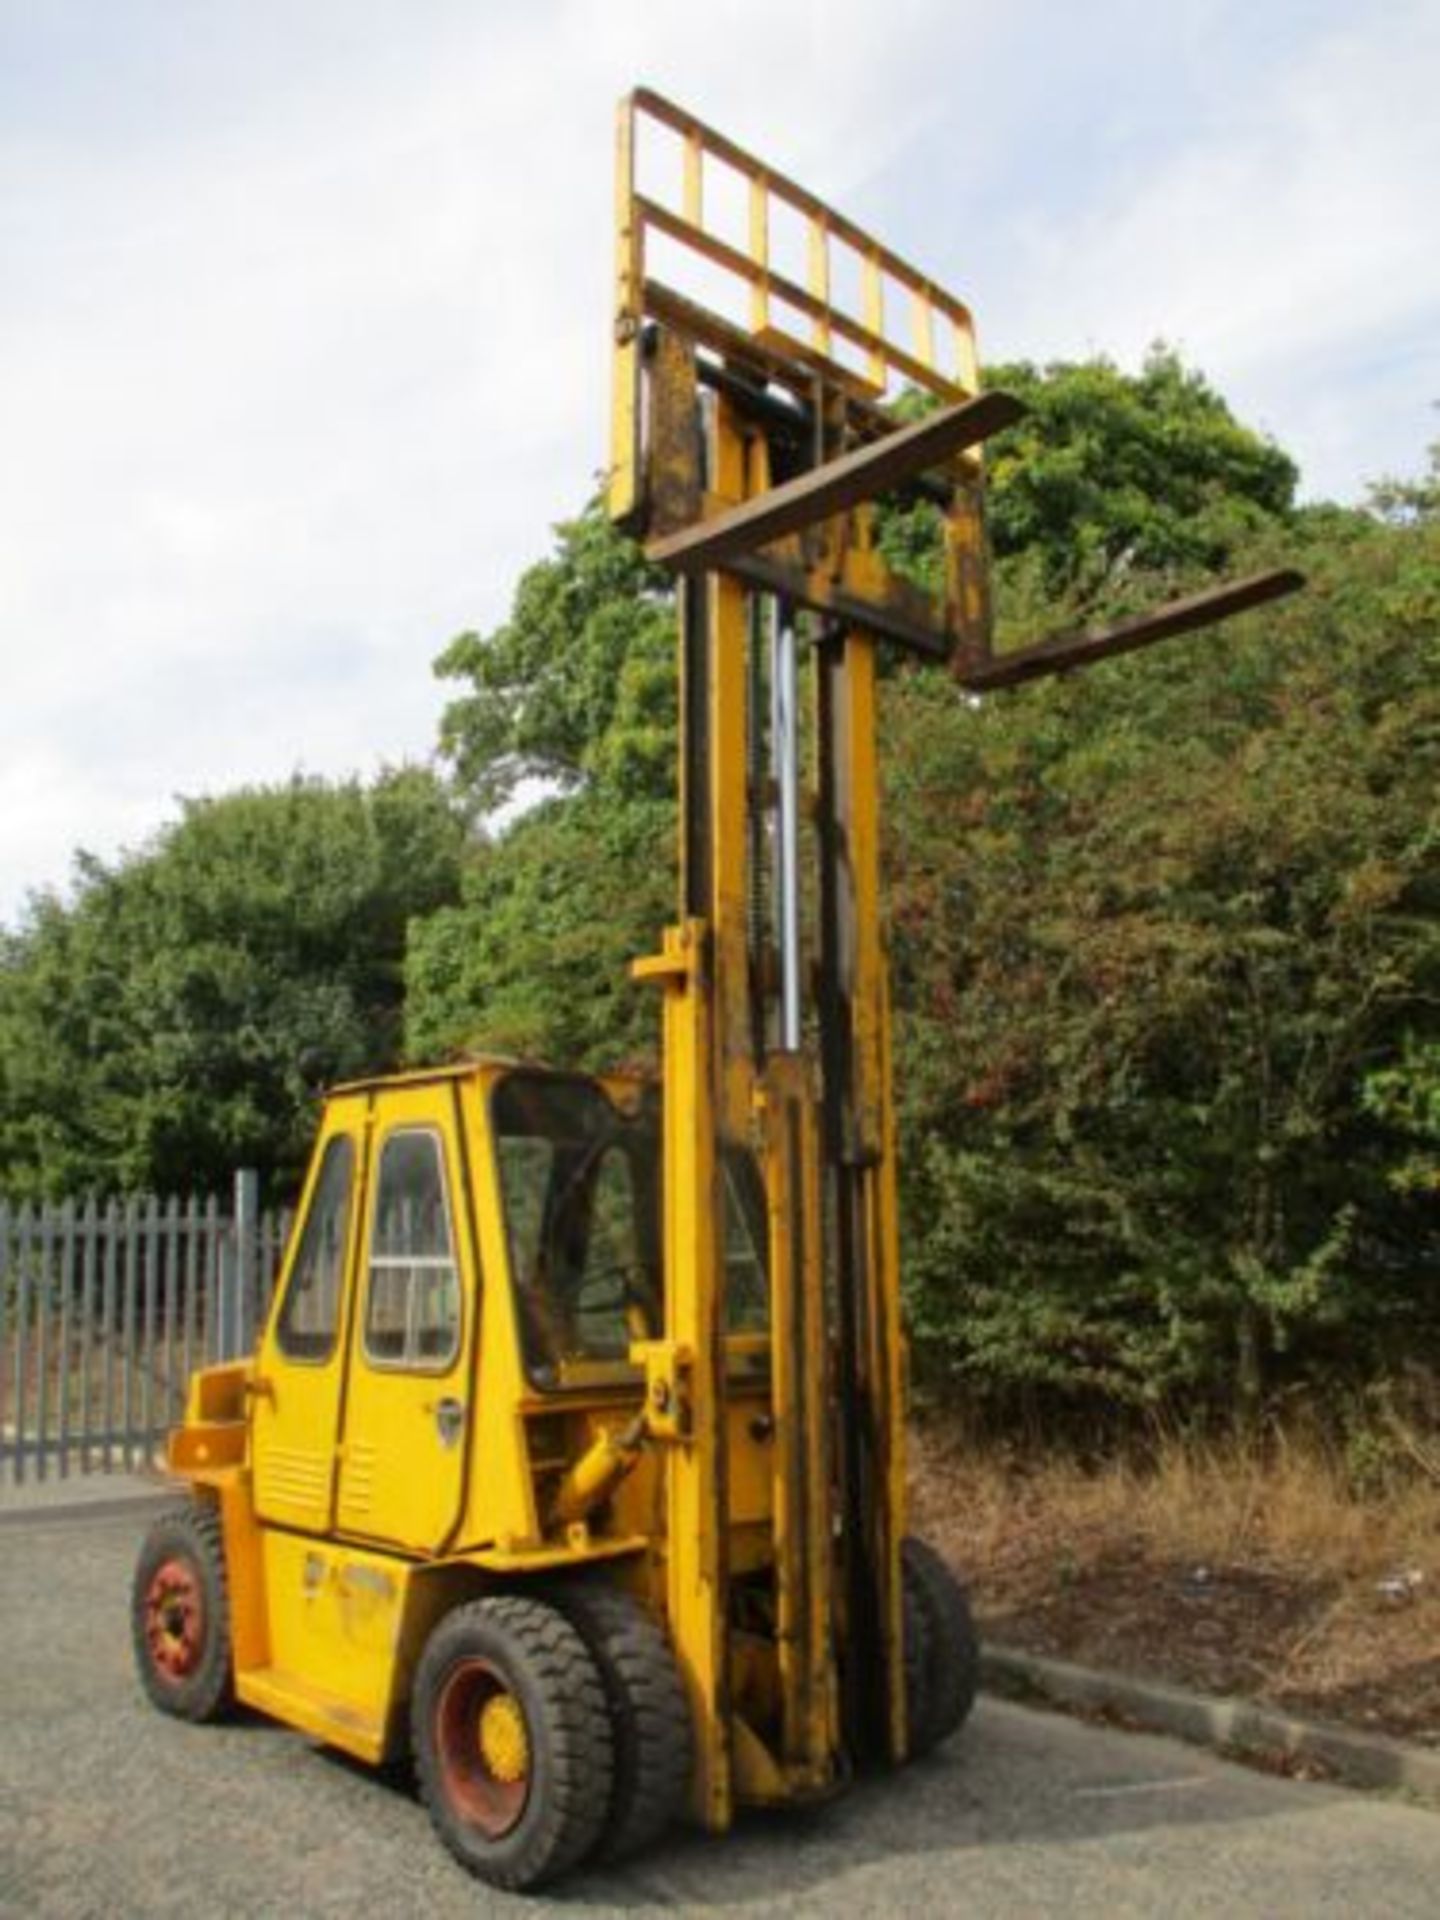 CLIMAX DA50 FORK LIFT FORKLIFT TRUCK STACKER 5 TON LIFT 6 7 8 10 DELIVERY - Image 5 of 12